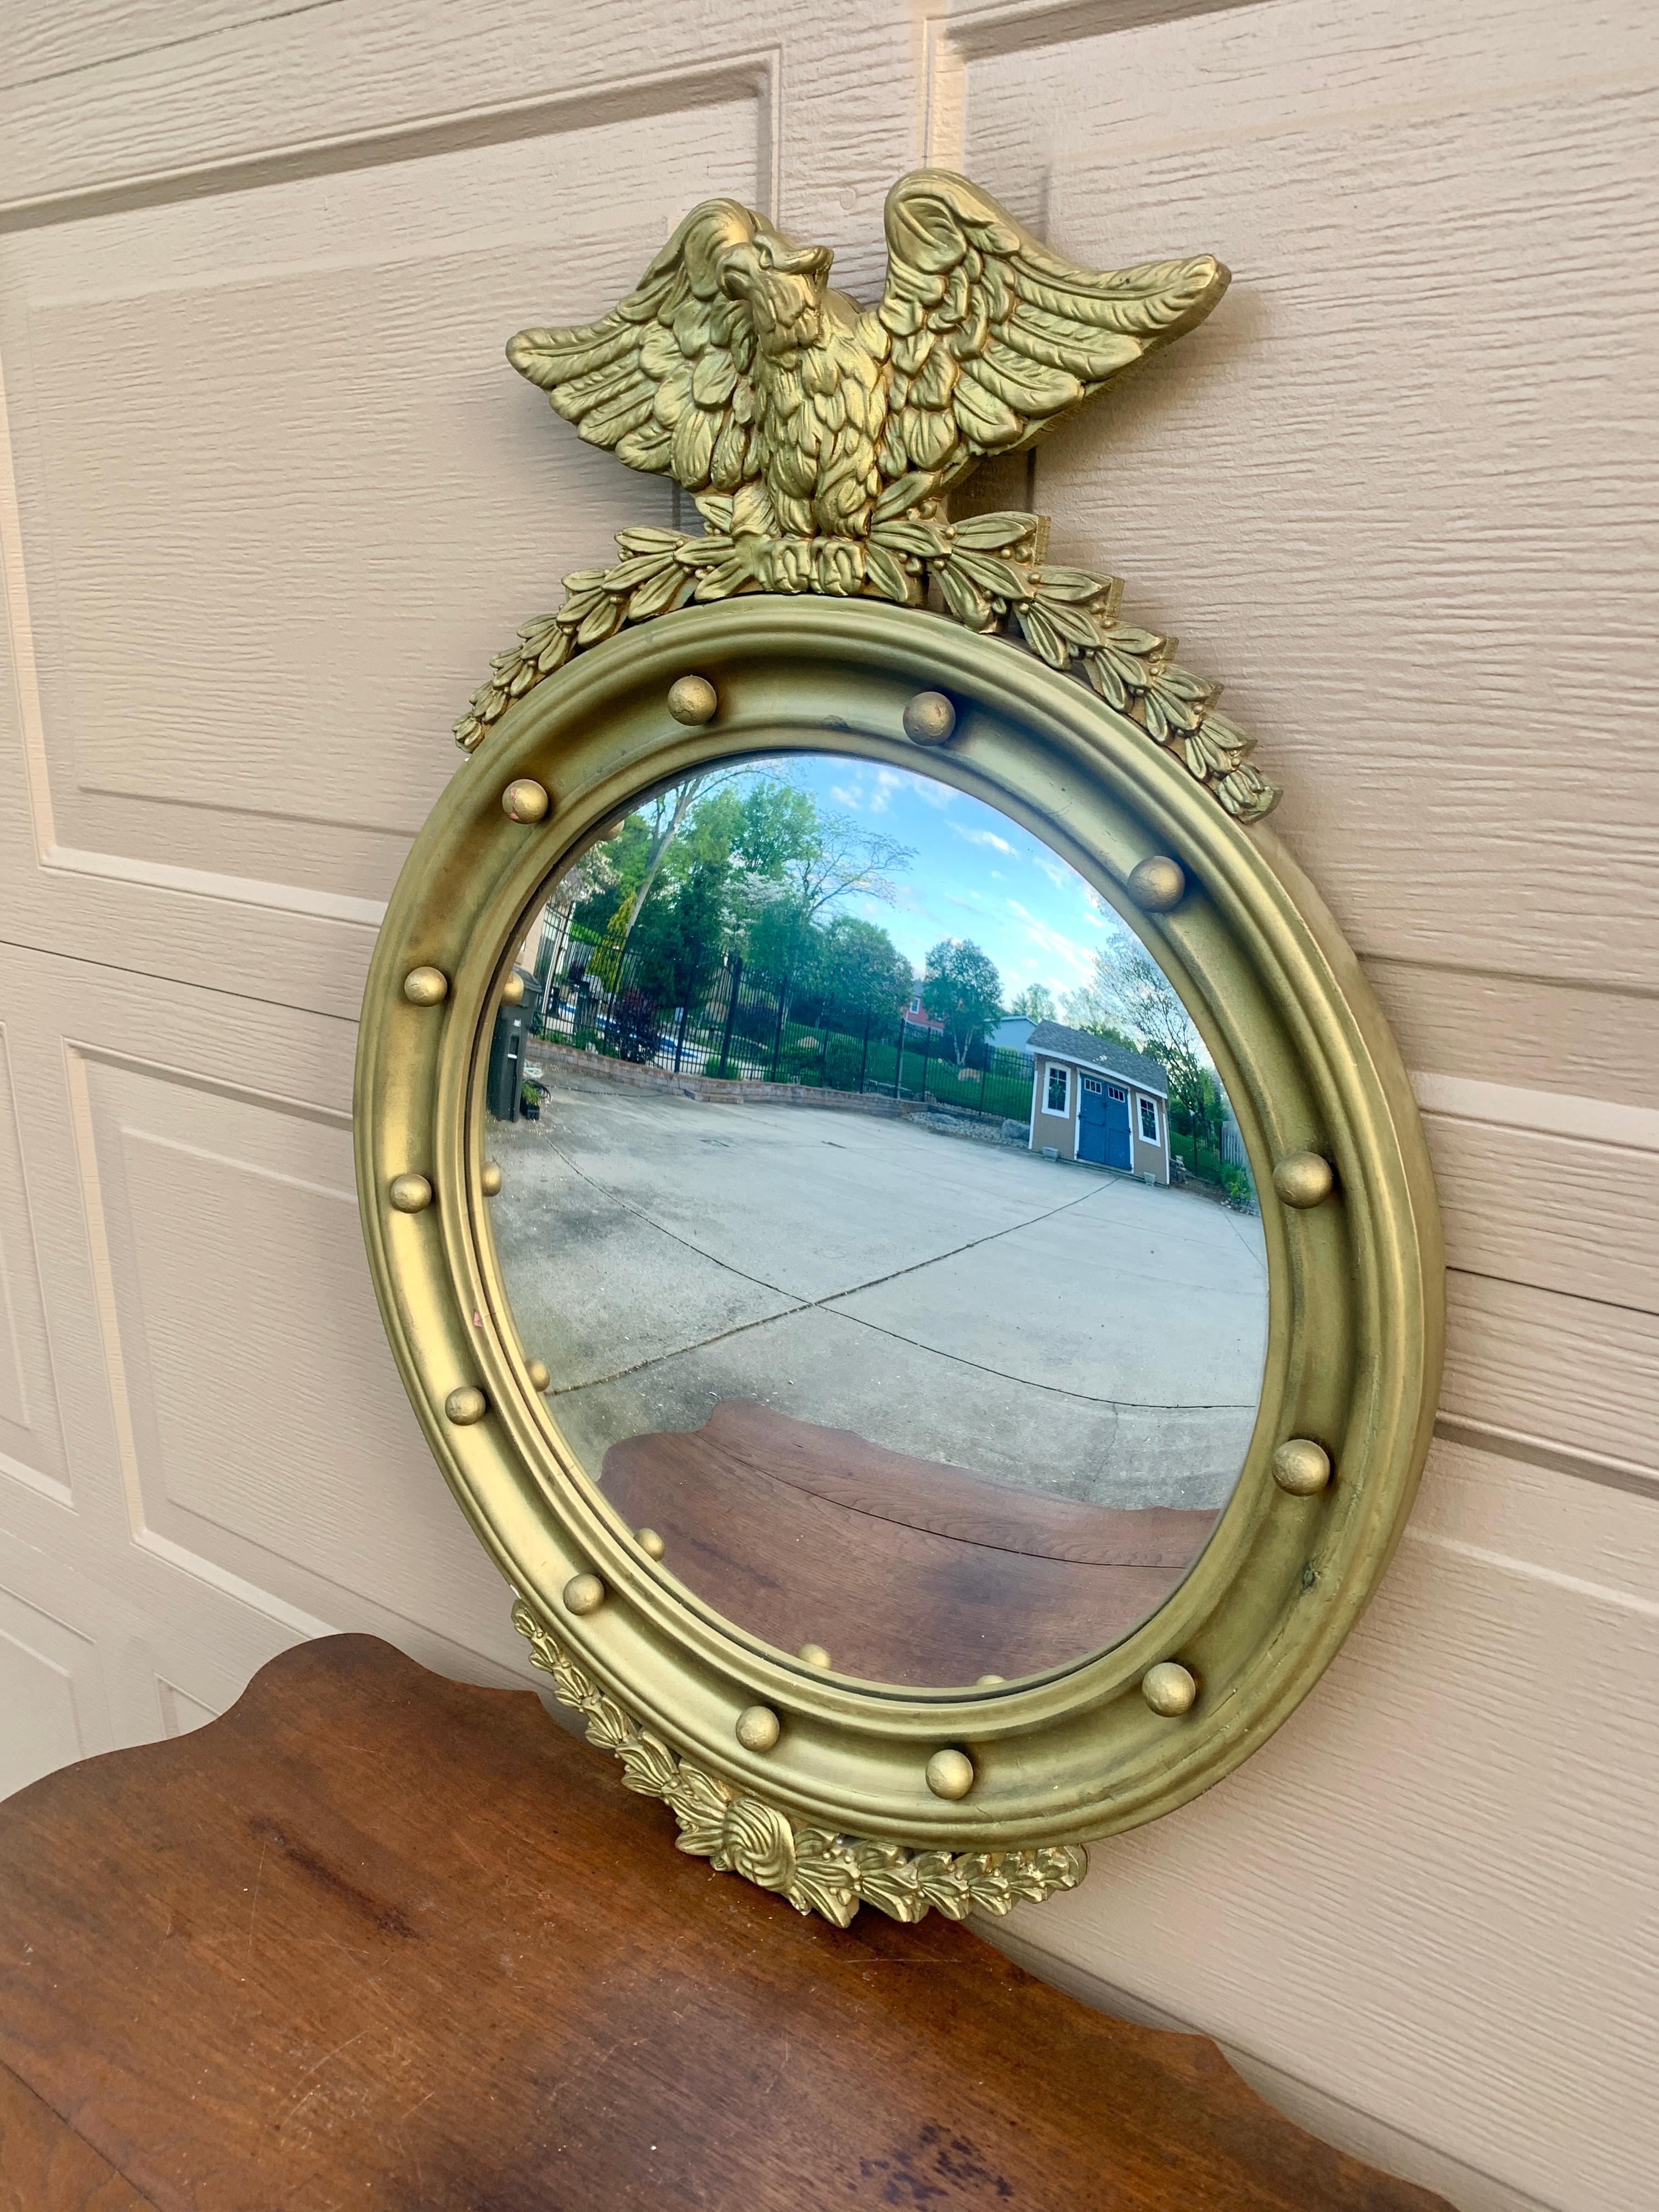 A gorgeous Federal or Regency style convex bullseye wall mirror featuring a carved eagle with open wings standing on olive branches and 13 small spheres representing the original 13 colonies around the inside perimeter.

USA, Mid-20th